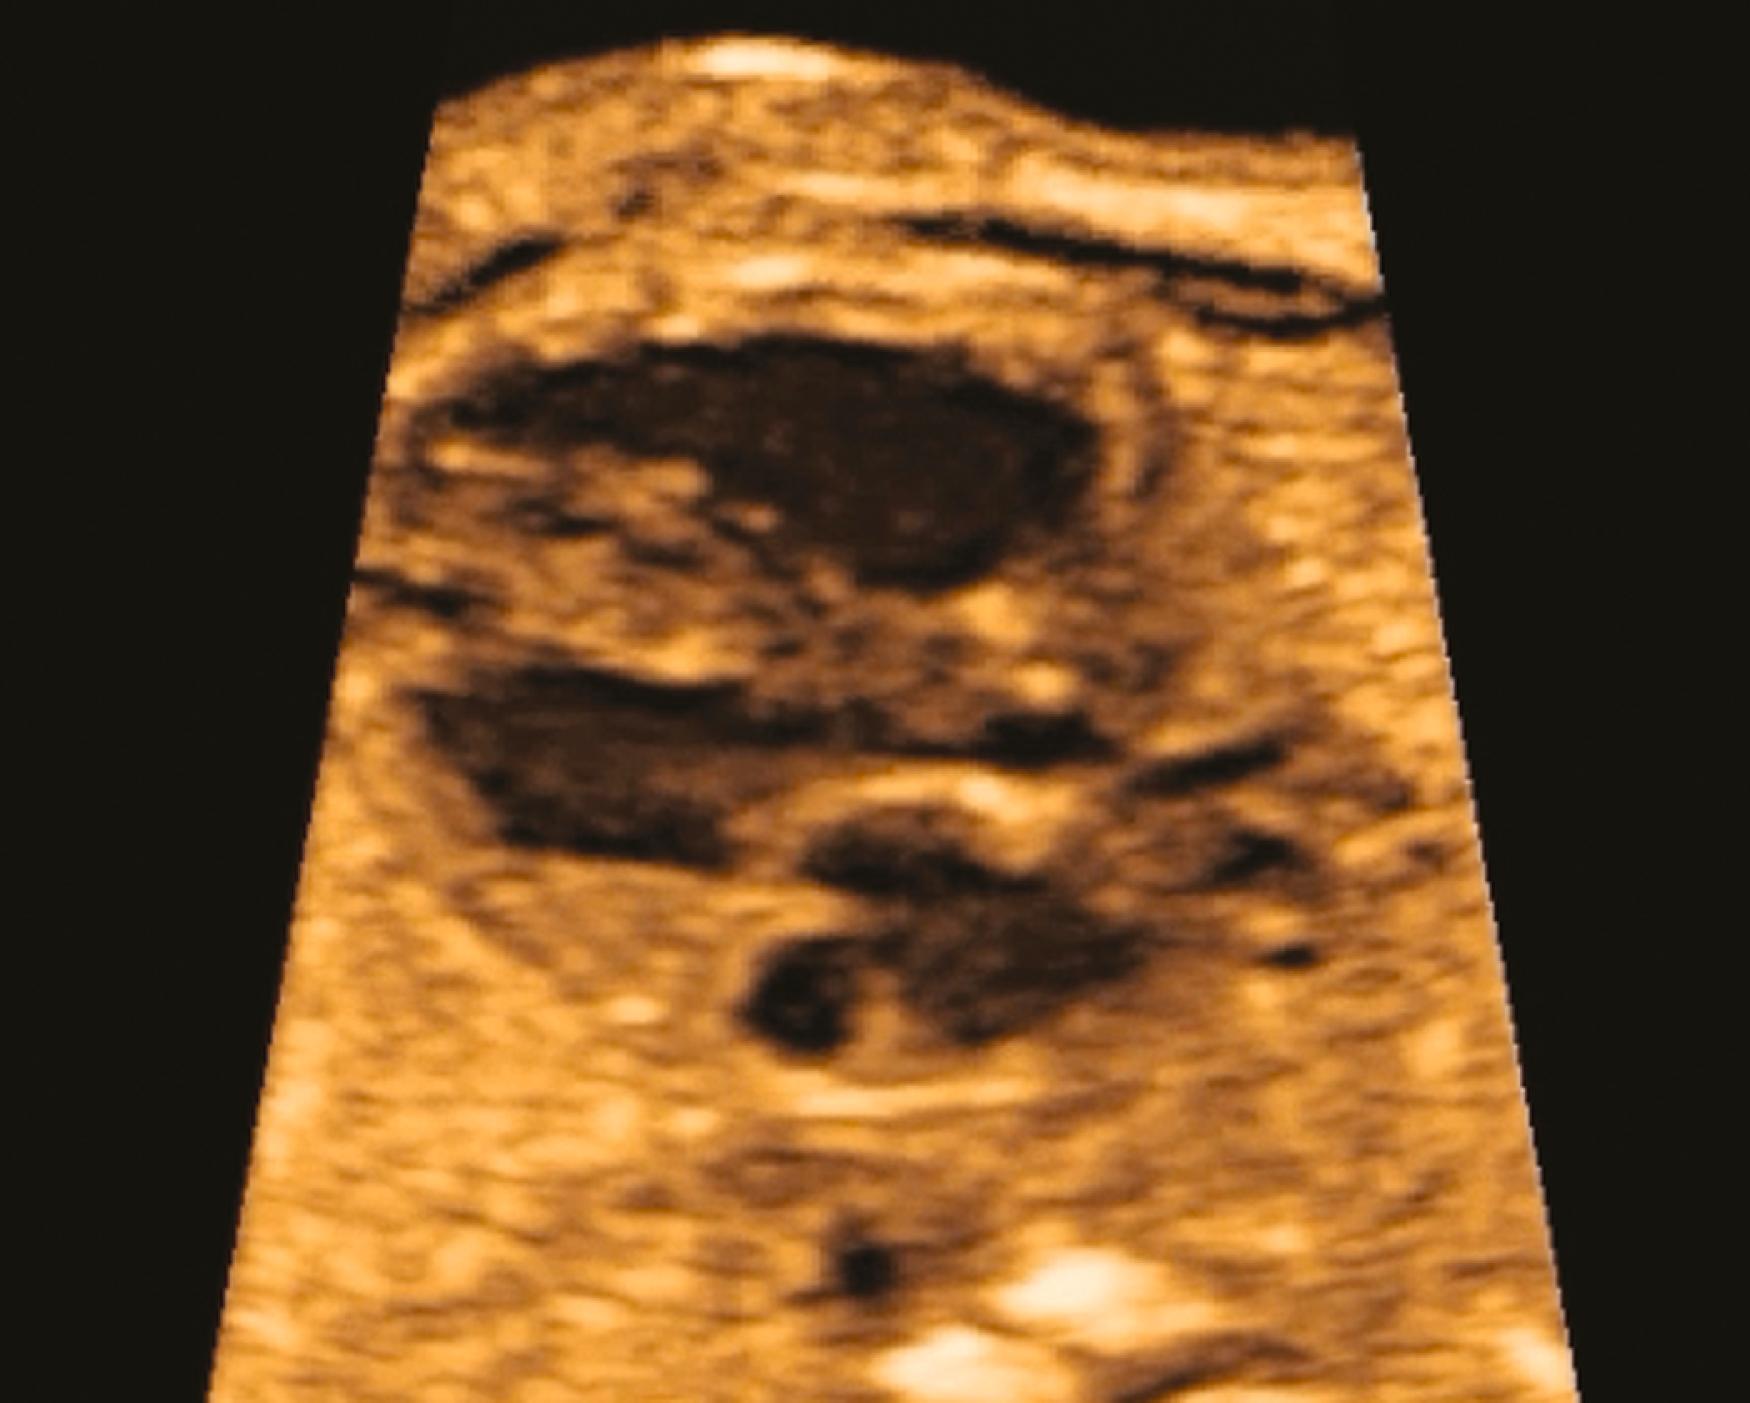 Figure 23.15, Fetal echocardiographic image of a left-ventricular long-axis view.